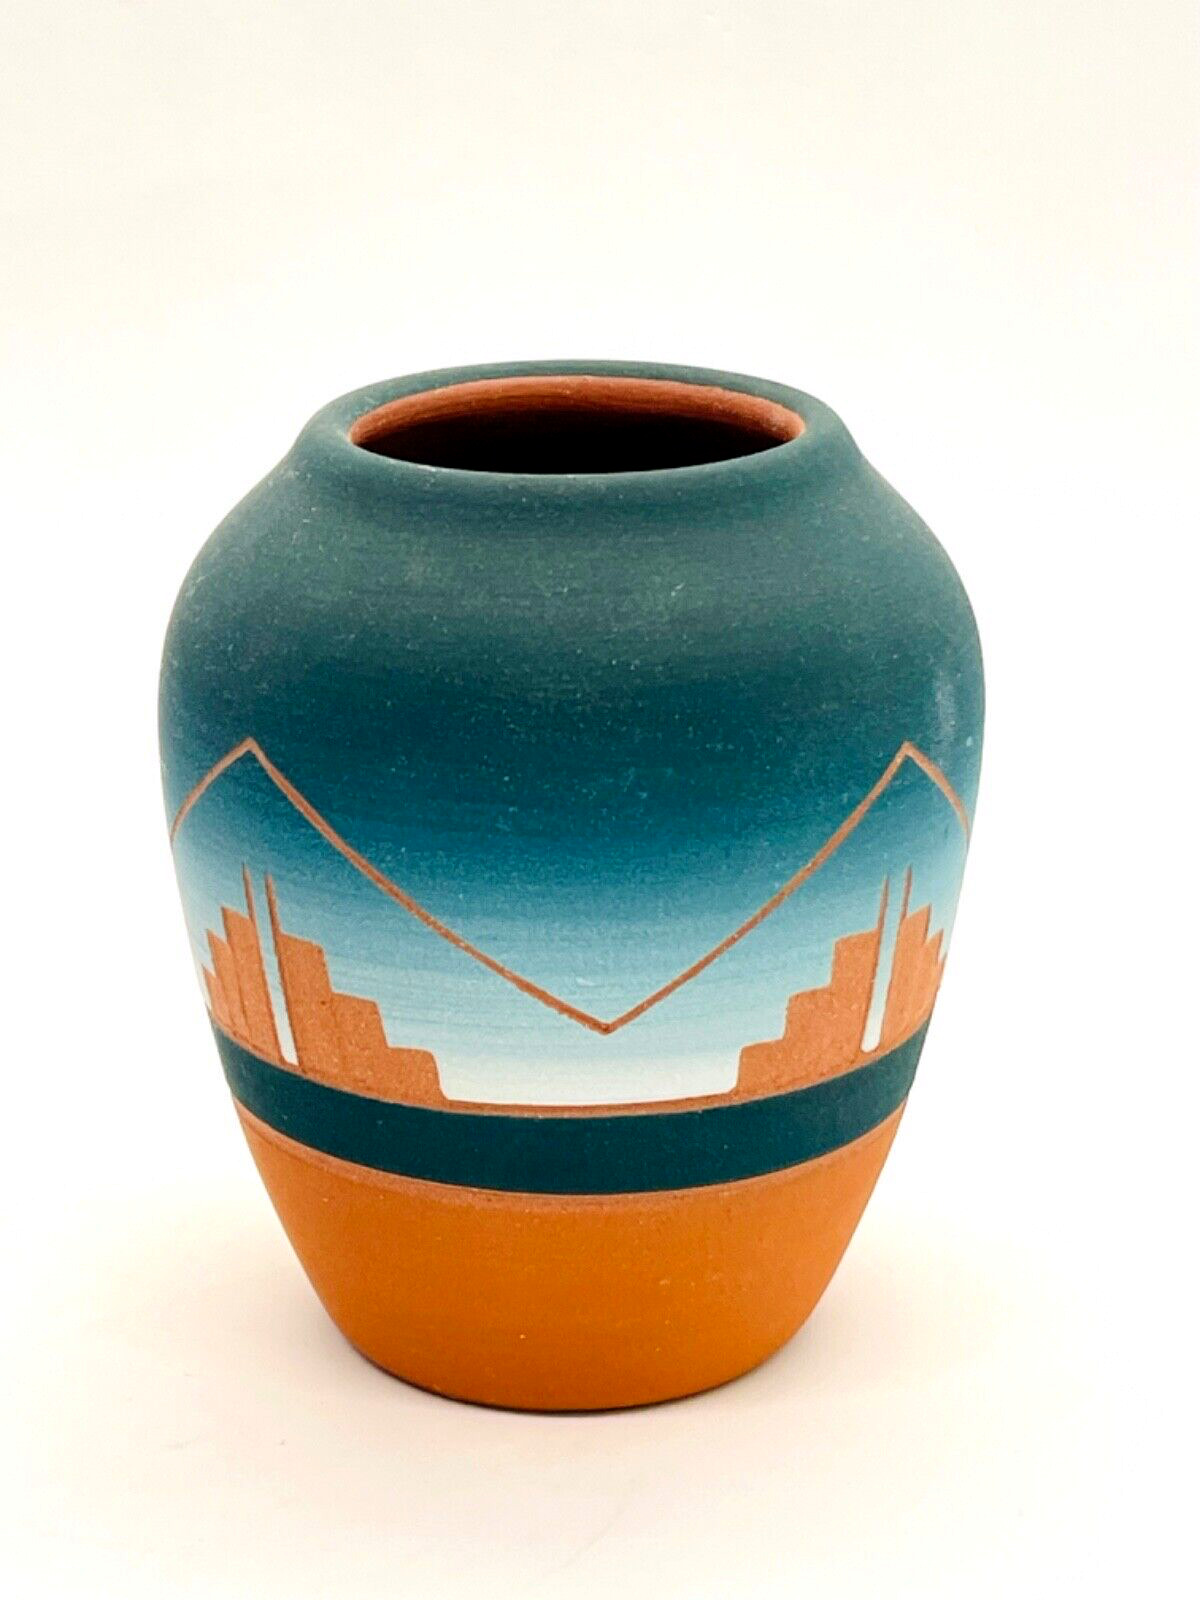 Sioux Native American Pottery Vase Signed Little Thunder - 3 Inch Tall